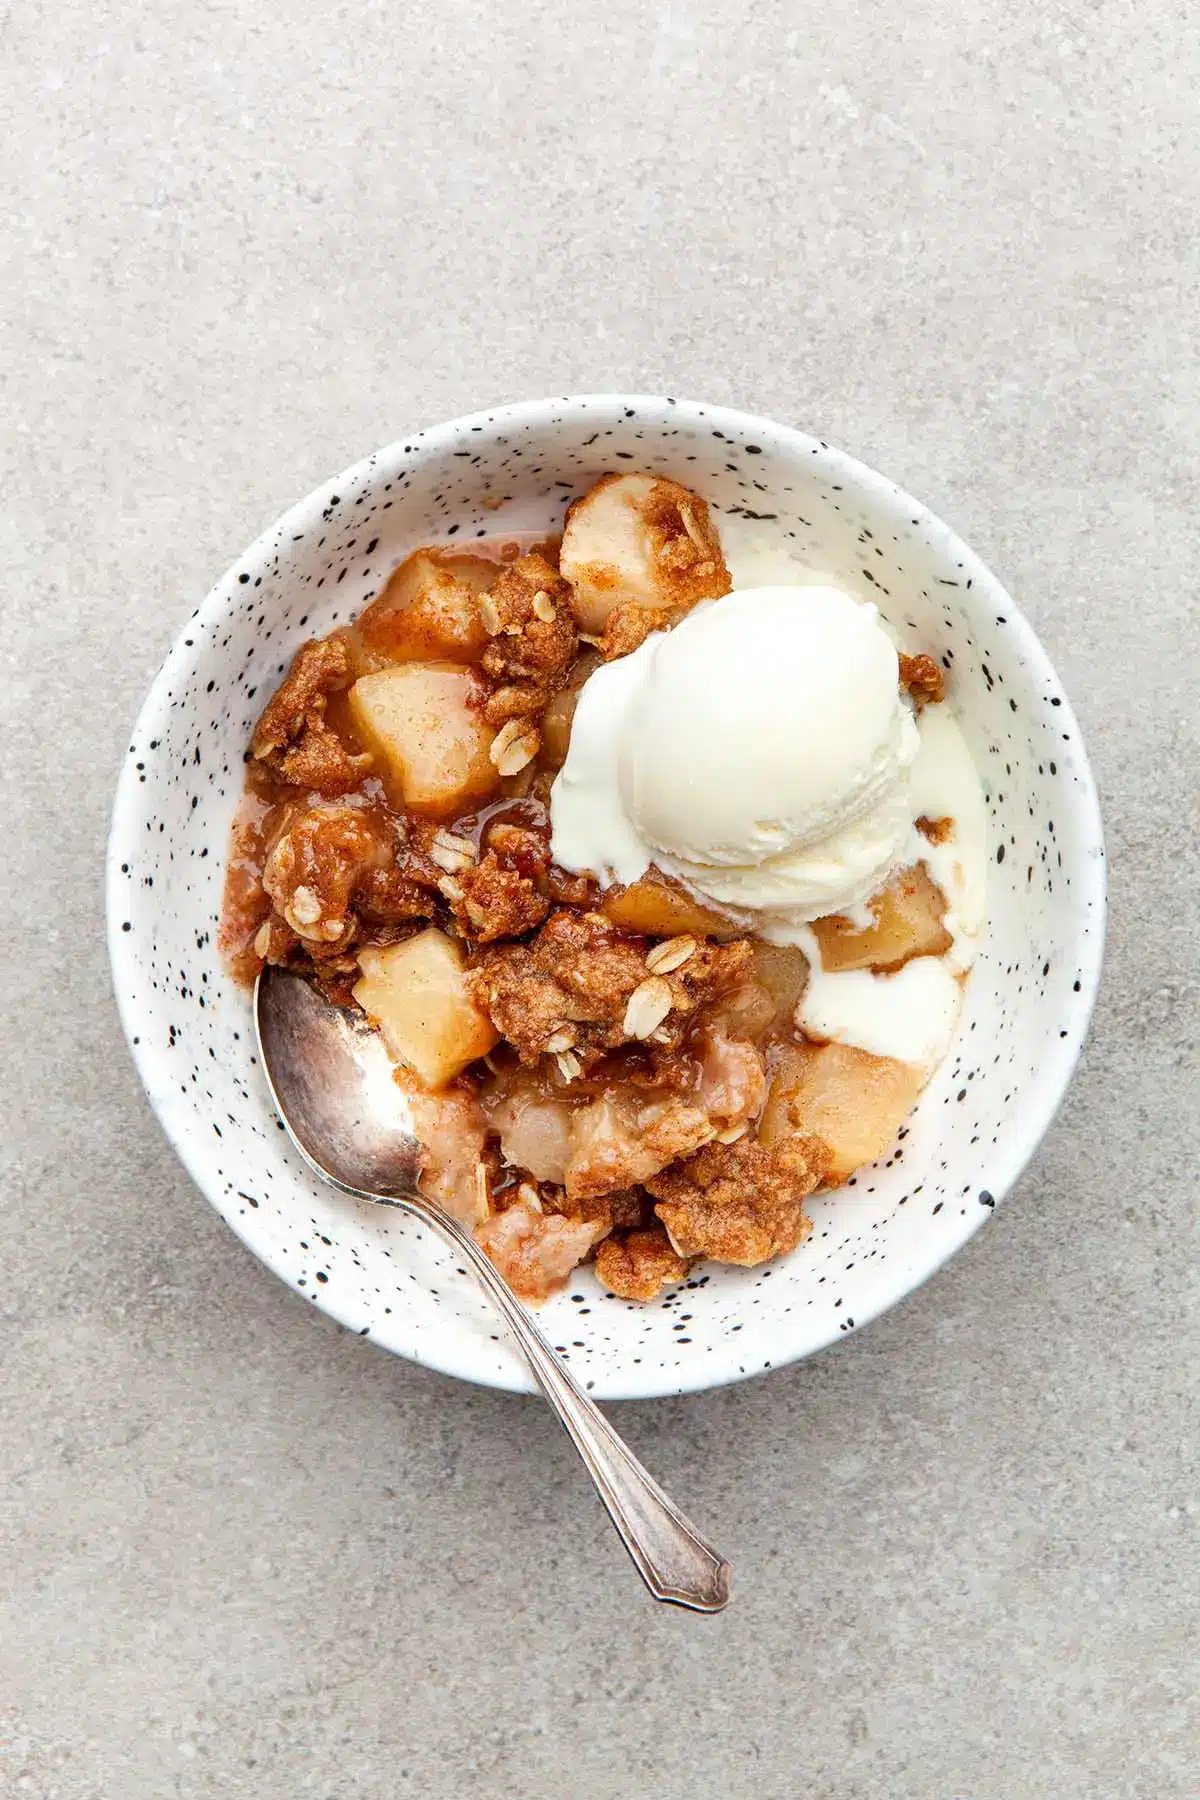 Apple crisp with vanilla ice cream in a speckled bowl.